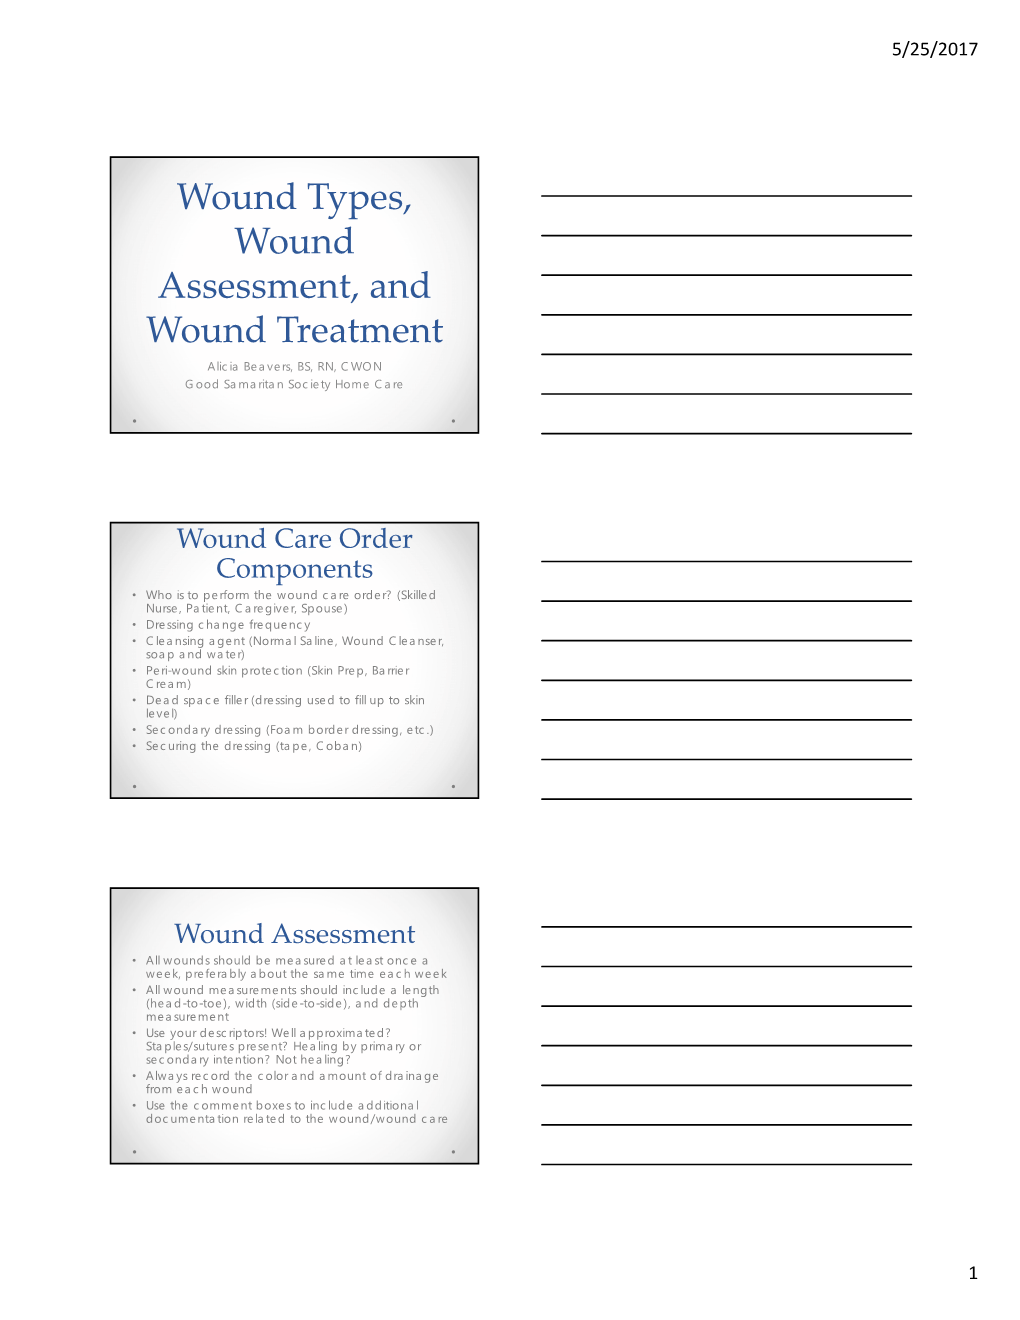 Wound Types, Wound Assessment, and Wound Treatment Alicia Beavers, BS, RN, CWON Good Samaritan Society Home Care